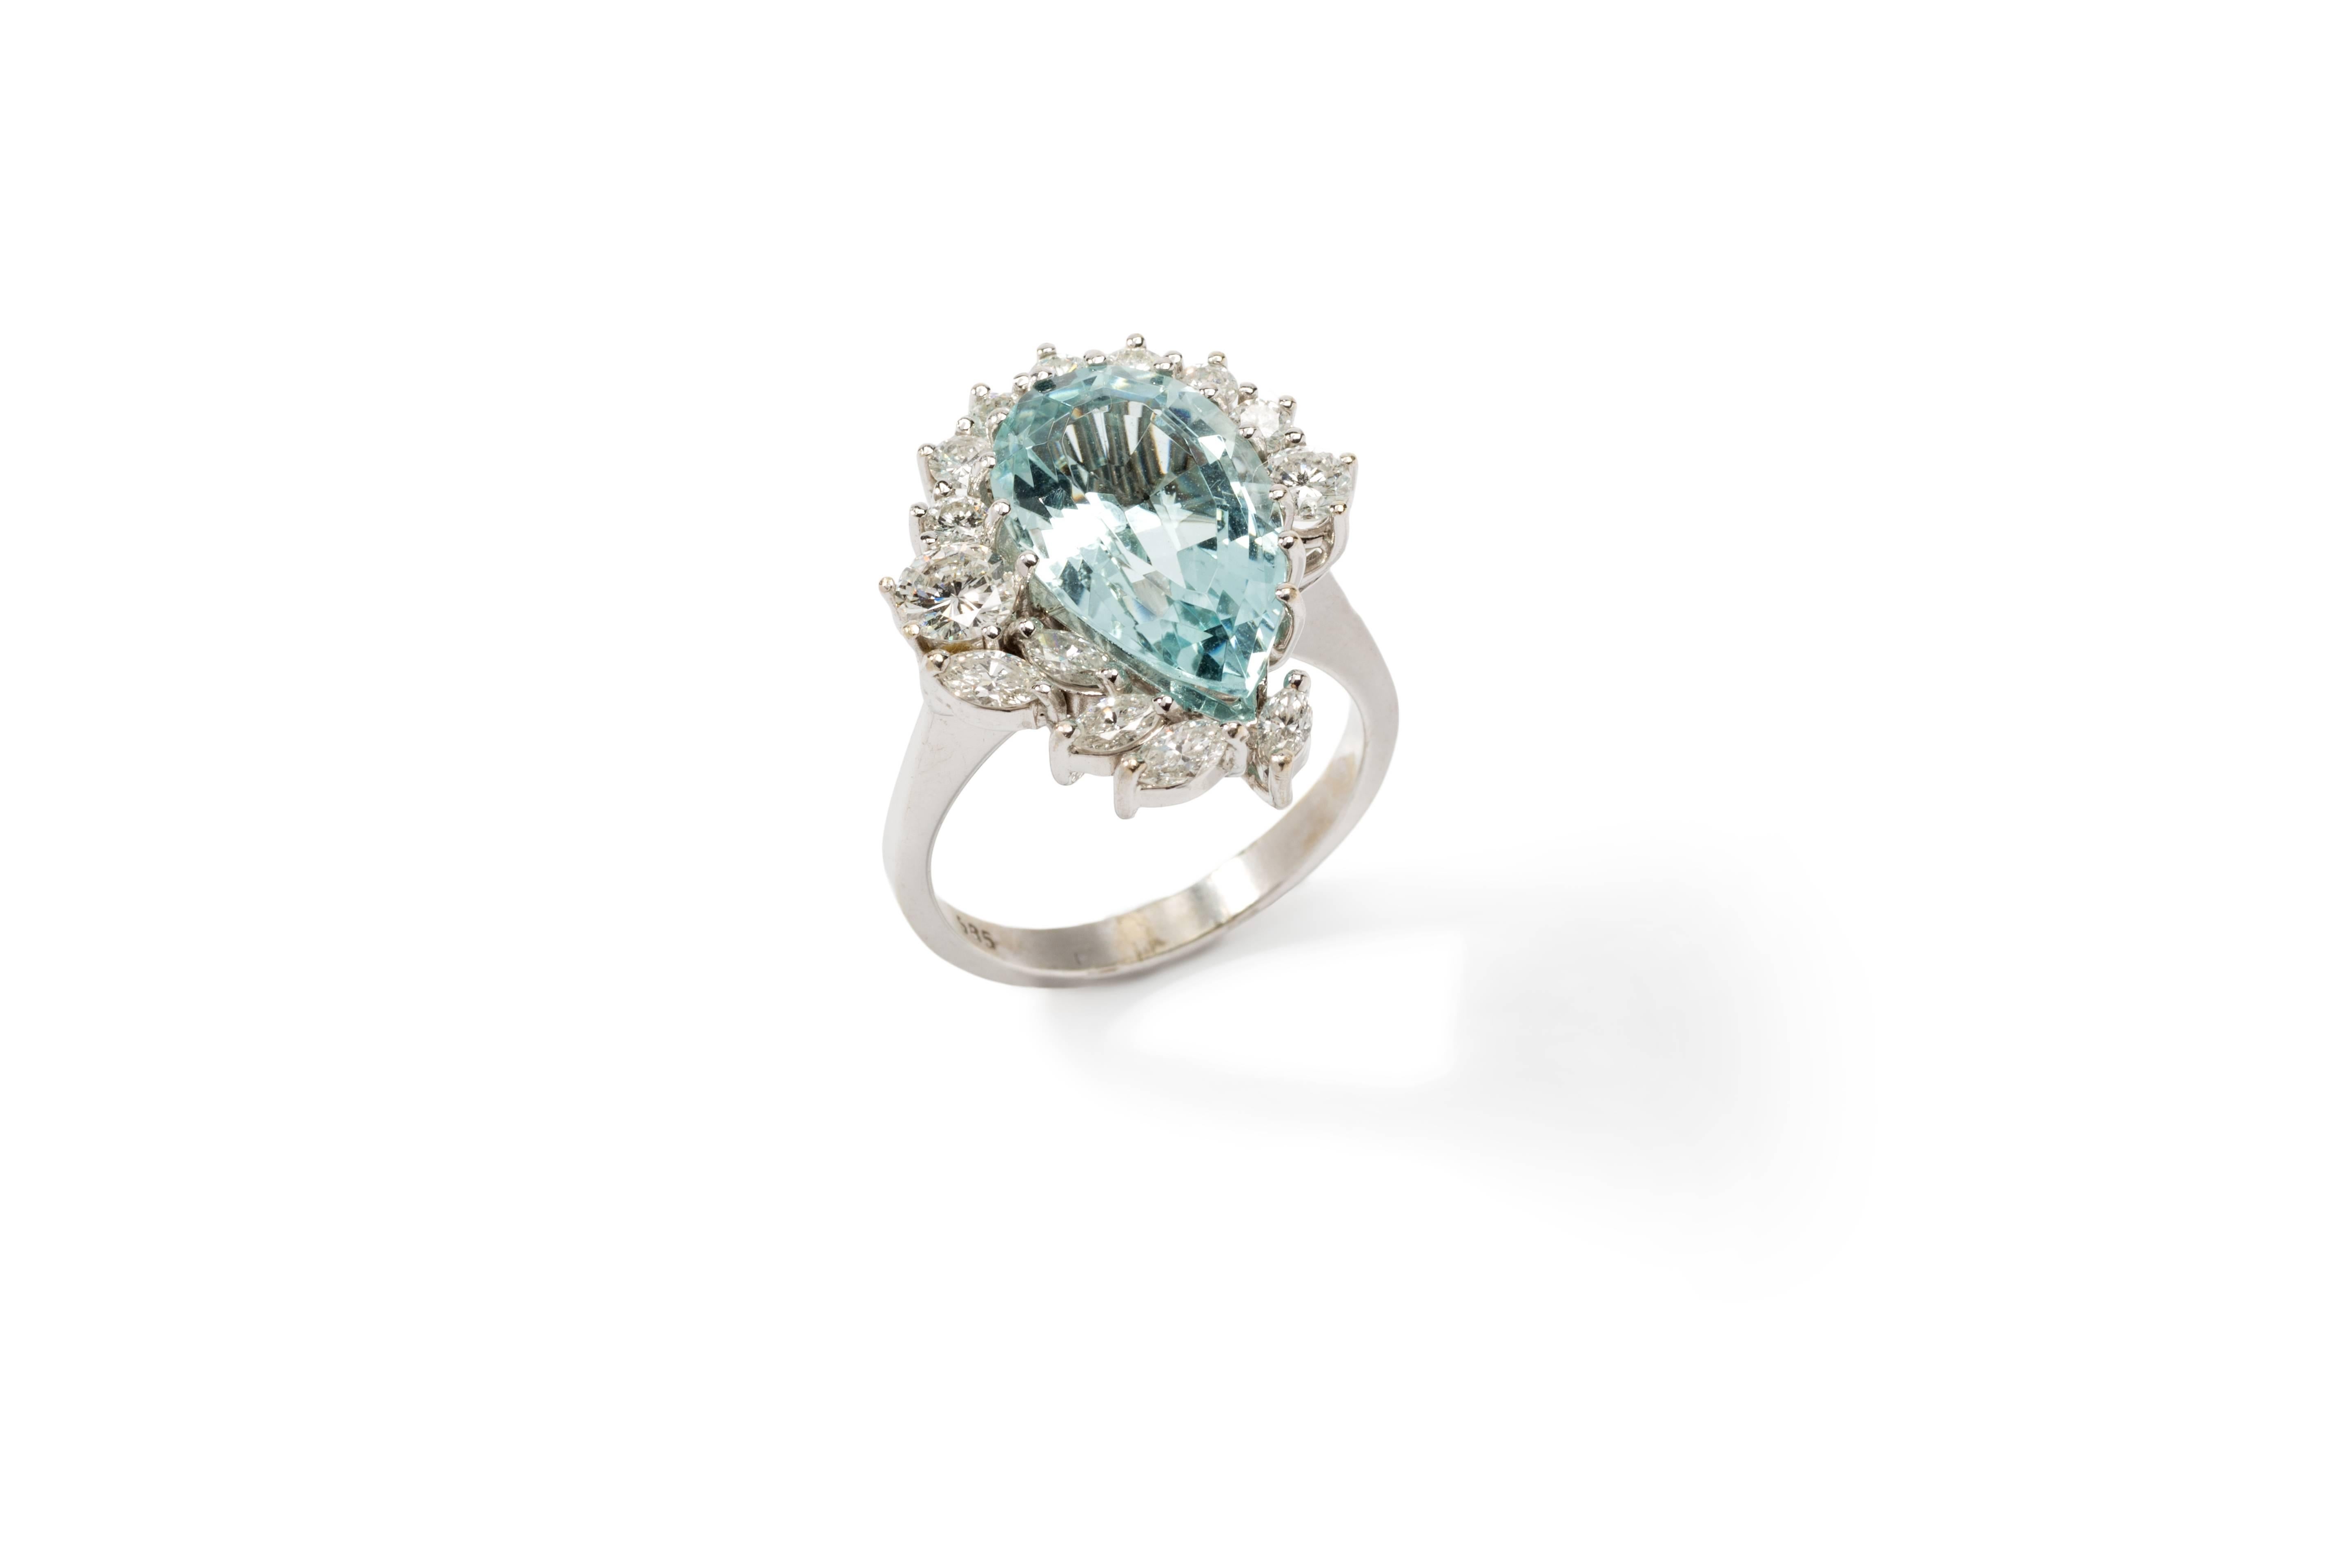 Set with aquamarine weighing circa 6,60 ct., surrounded by 8 brilliant-cut diamonds and 5 navette-cut diamonds weighing ca. 1,42 ct. Mounted in 14 K white gold. Marked with the purity 585. Total weight: 7,21 grams.
Measurements: 0.91 x 0.79 in ( 2,3